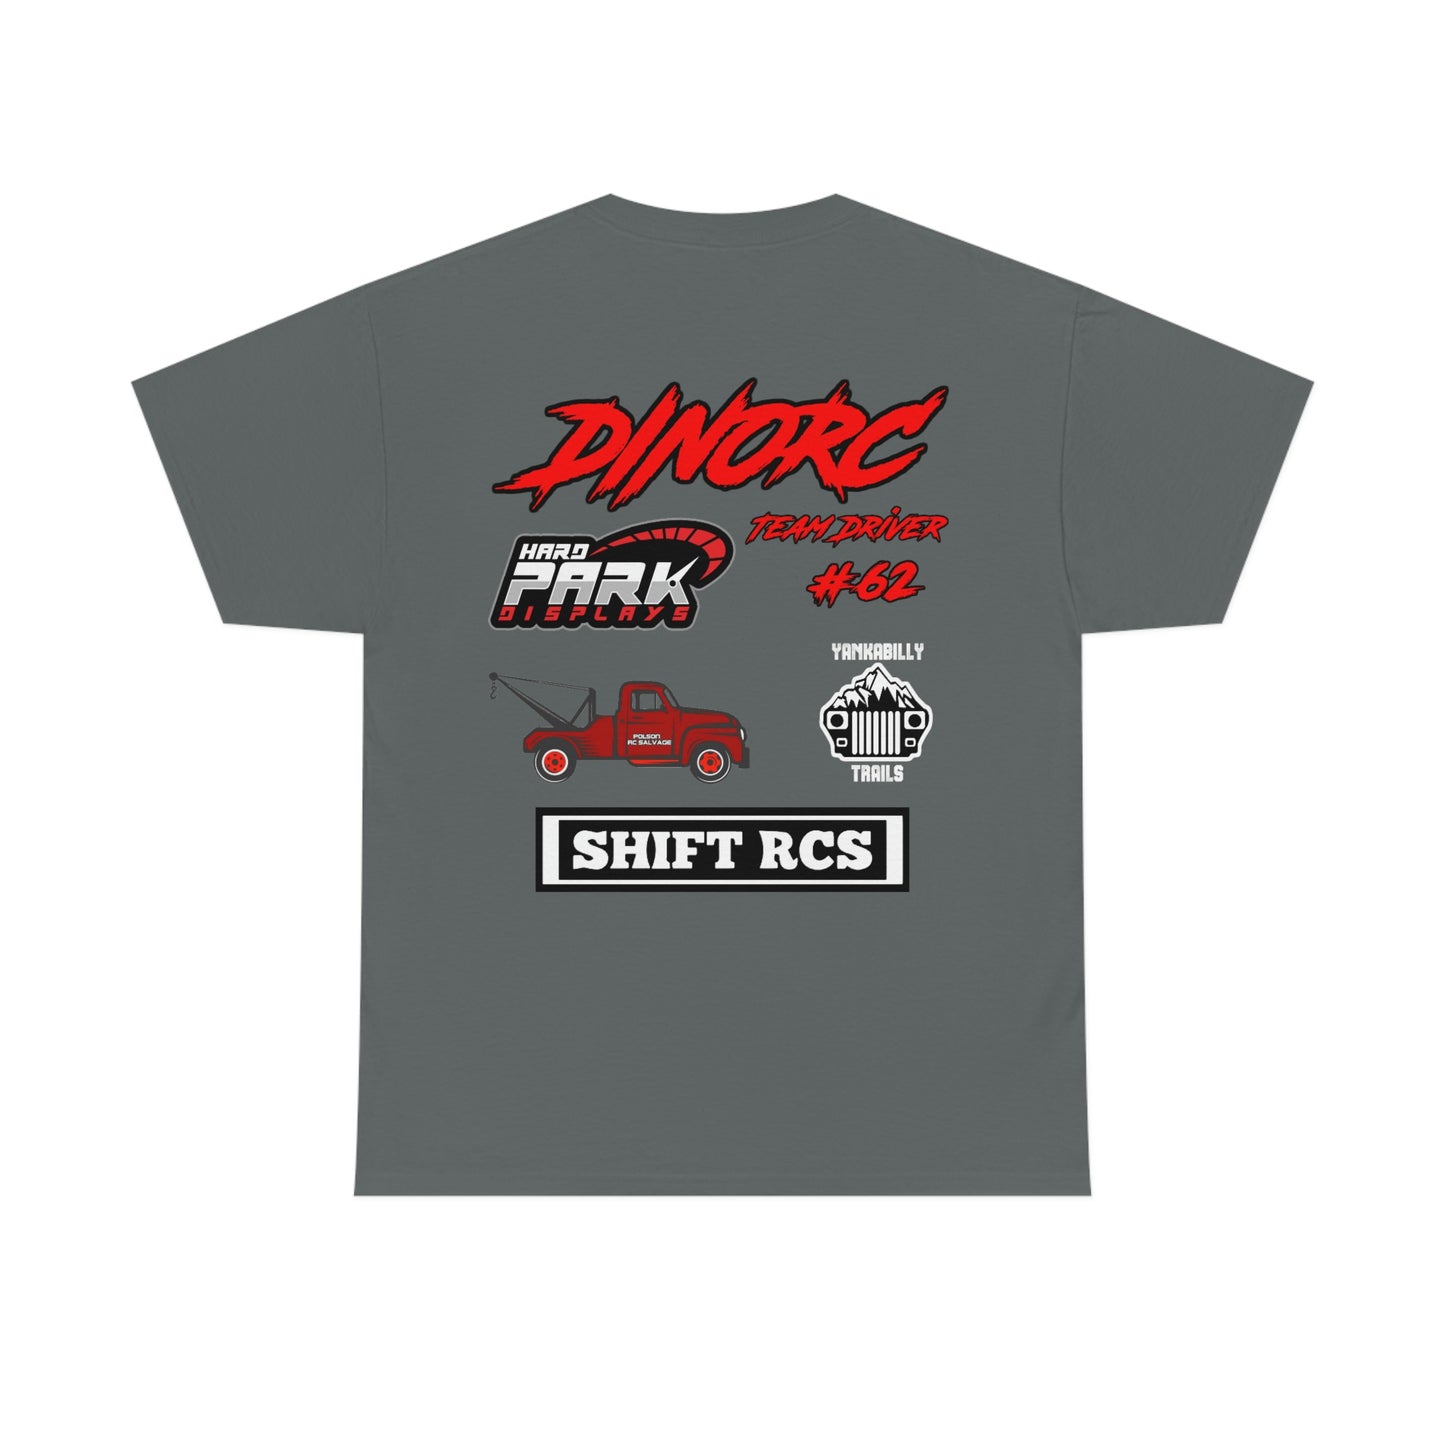 Team Driver Colton Mcgee truck logo Front and Back DinoRc Logo T-Shirt S-5x 5 colors